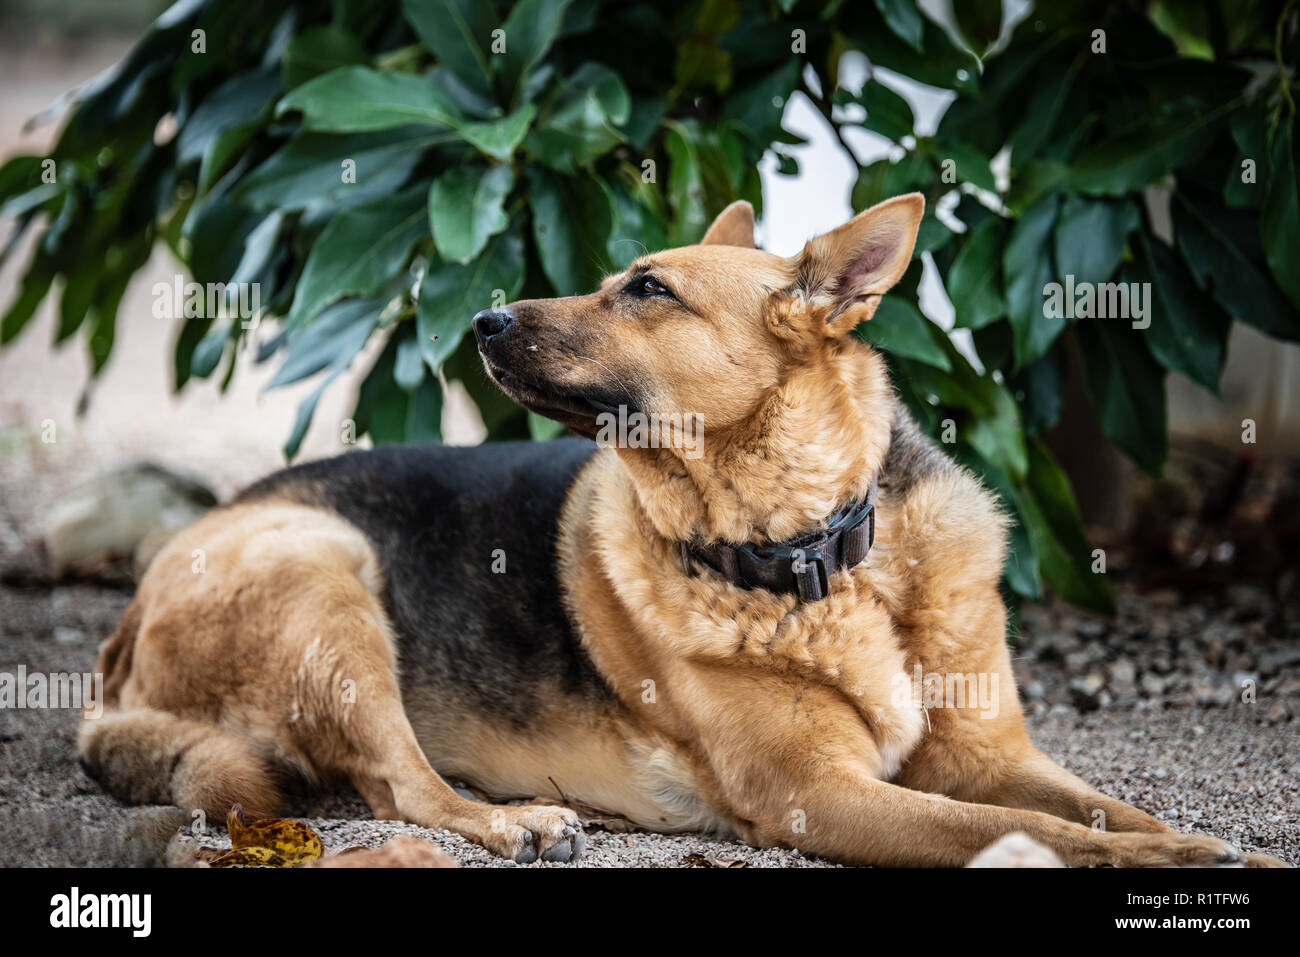 german shepherd dog sitting in front of the house Stock Photo